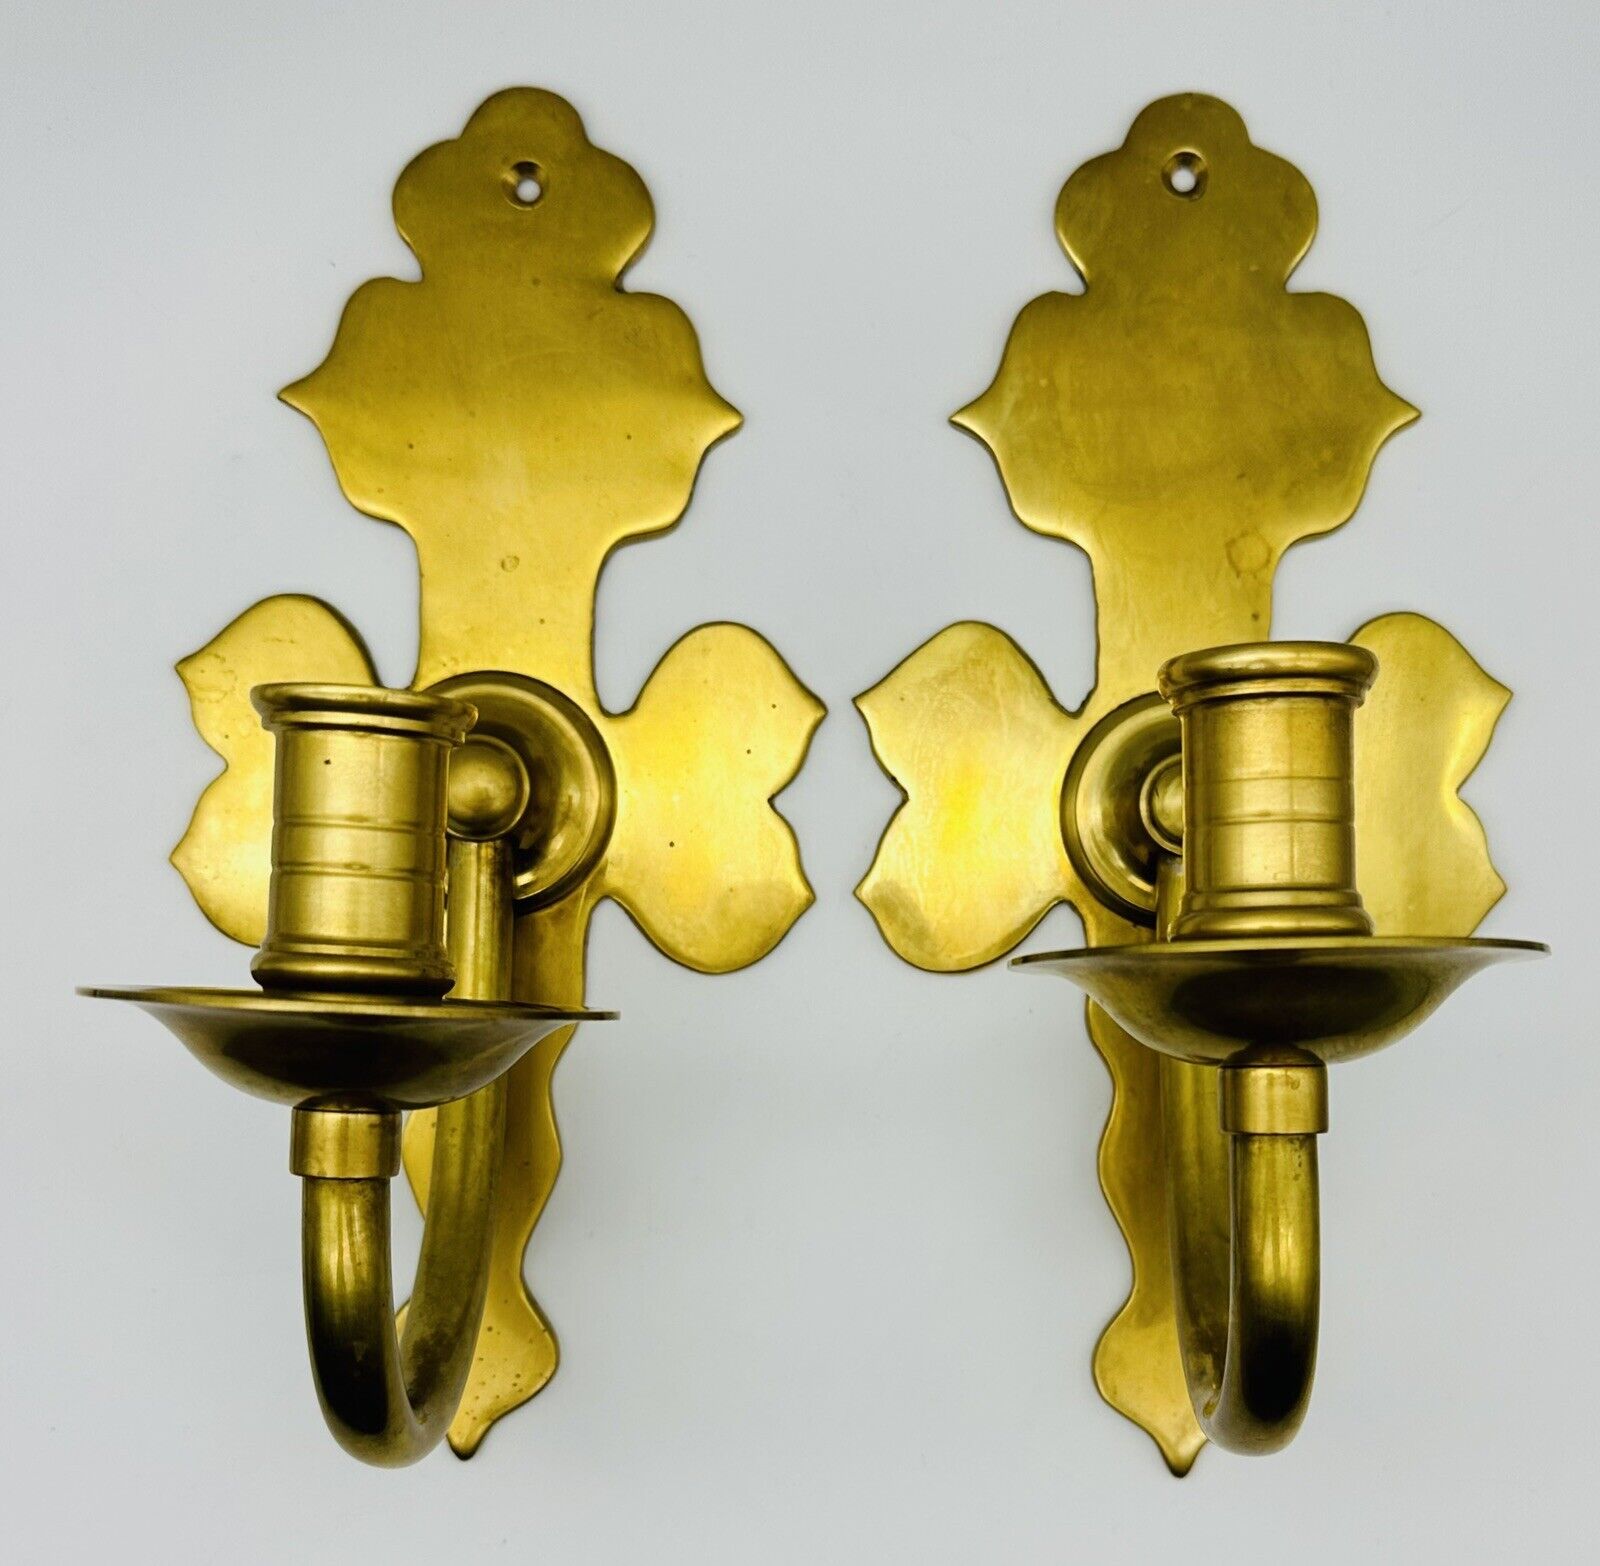 Pair Solid BRASS Candlestick Wall Mount Sconce Candle Holders Vintage Hong Kong